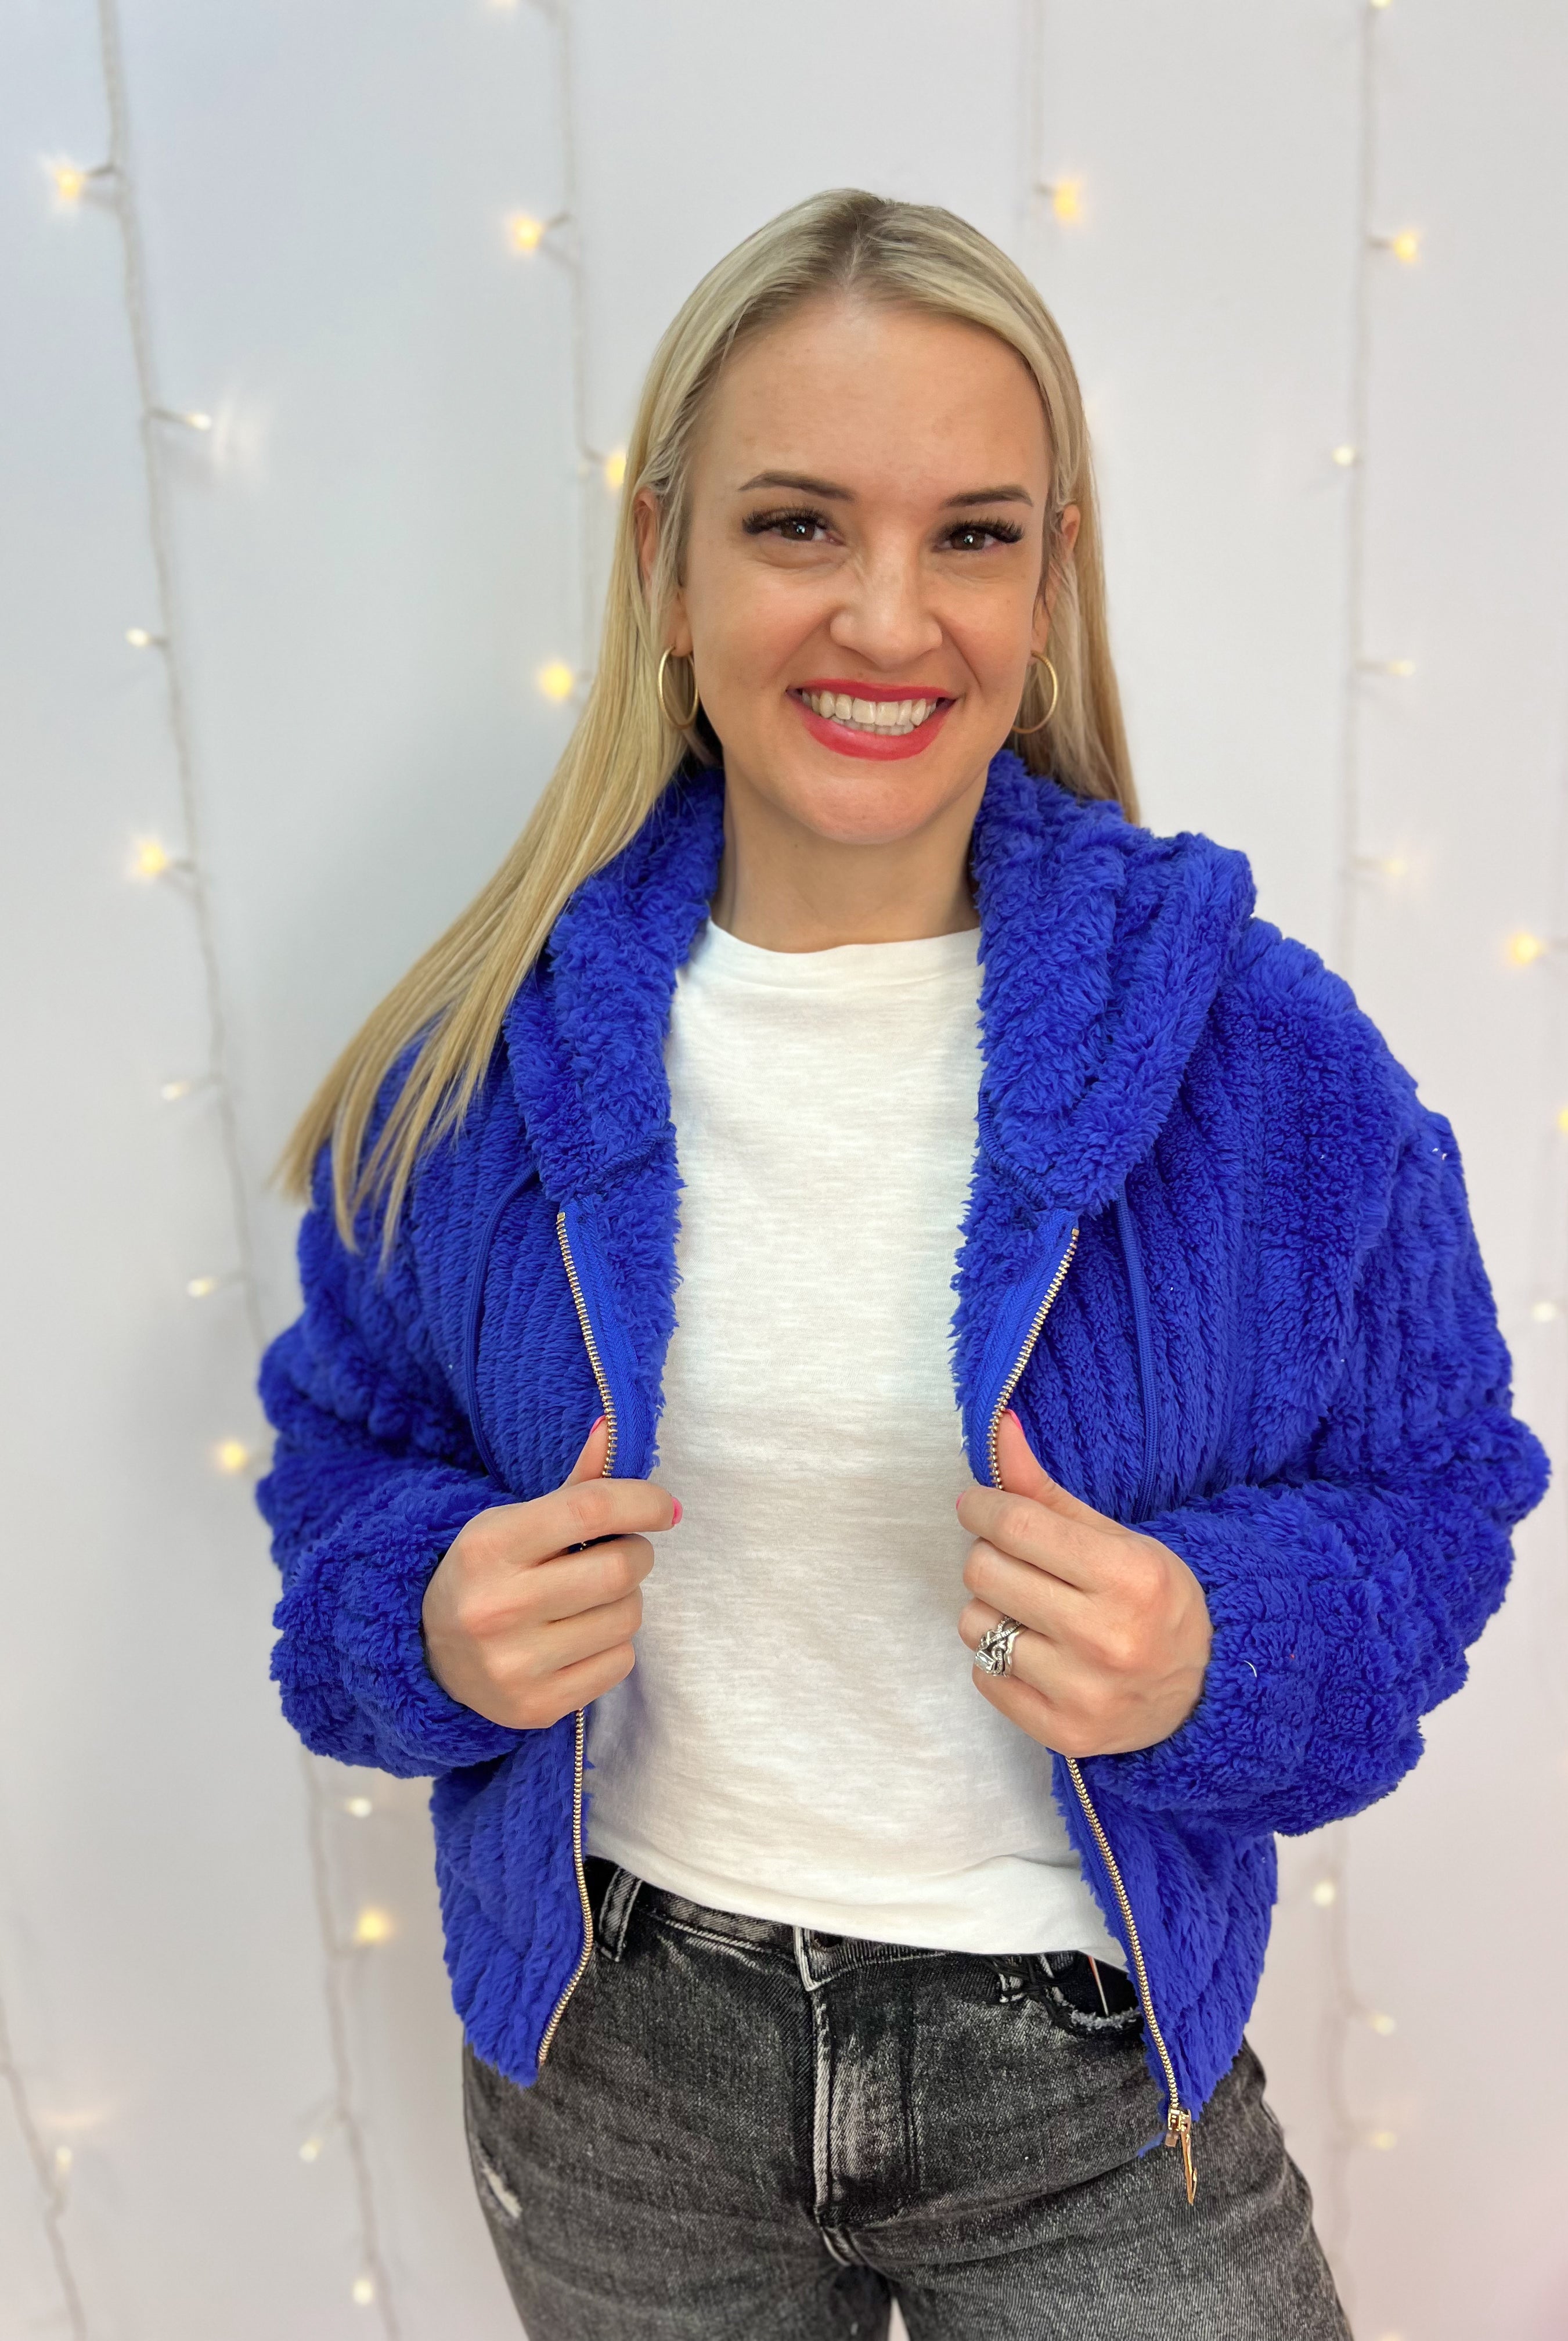 FINAL SALE - B-L-U-E Sherpa Zip Up Jacket-Jackets-The Lovely Closet-The Lovely Closet, Women's Fashion Boutique in Alexandria, KY